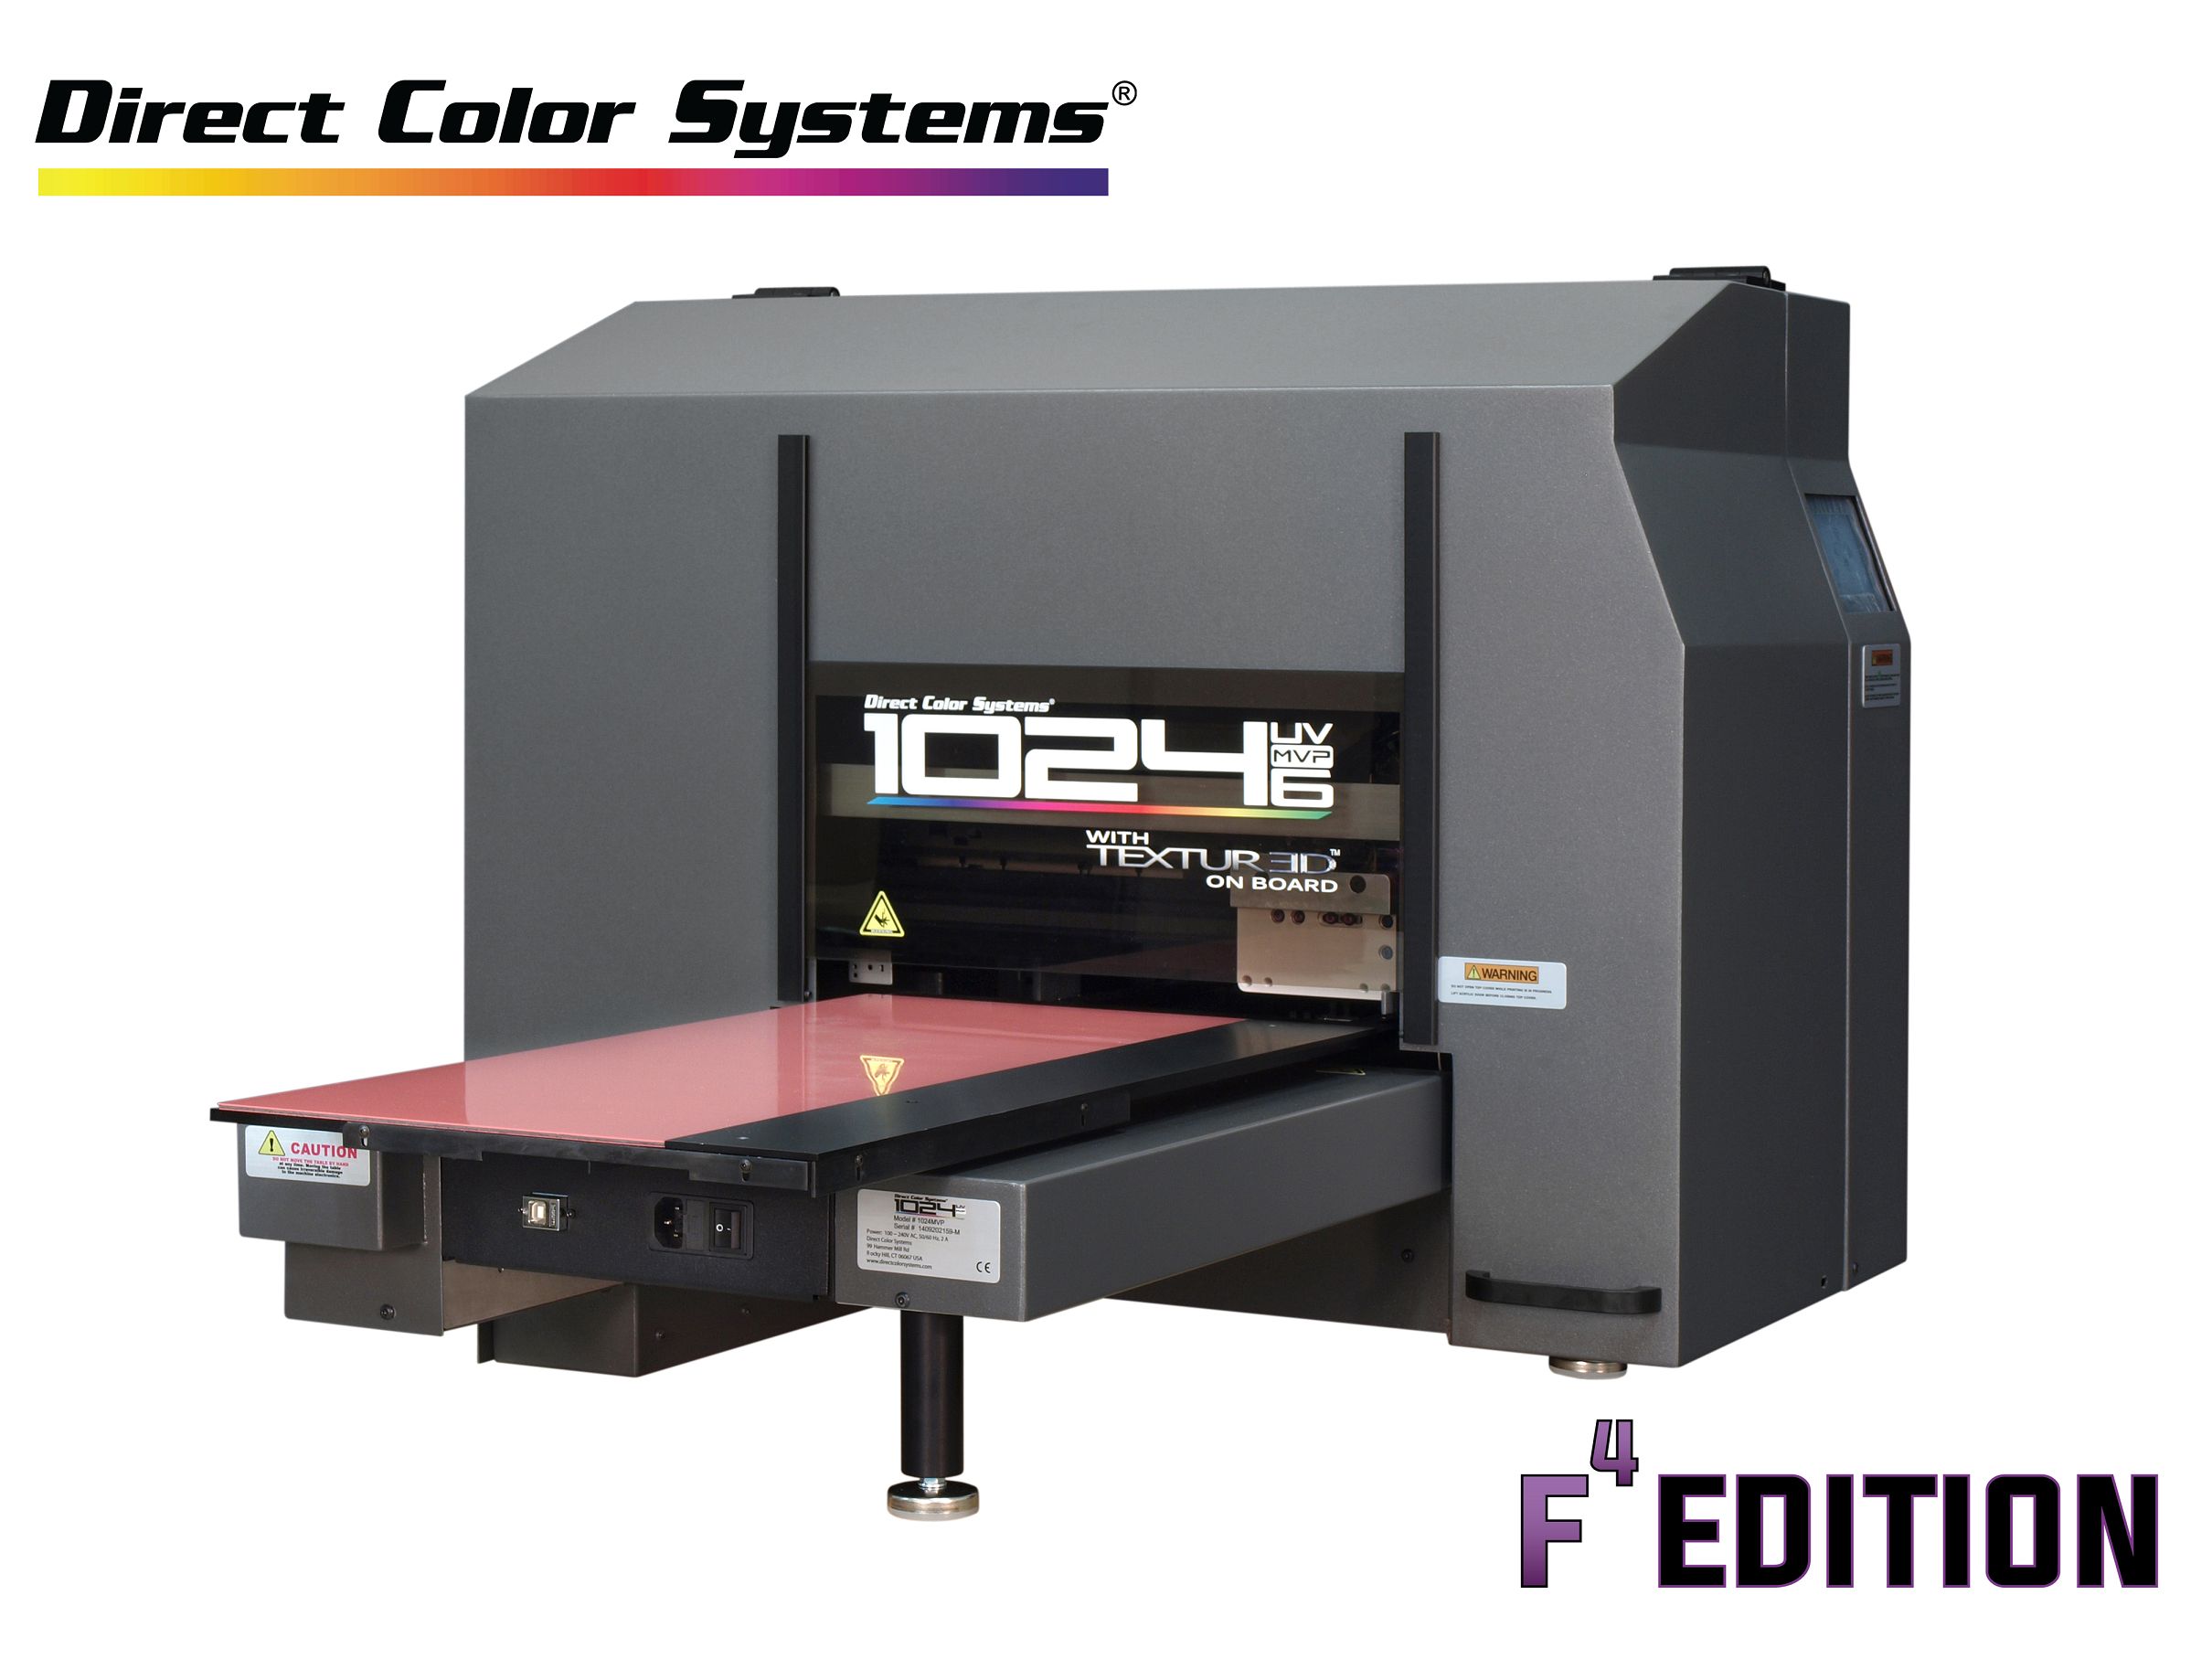 Polyprint introduces direct-to-film printing solution for TexJet DTG -  Images magazine